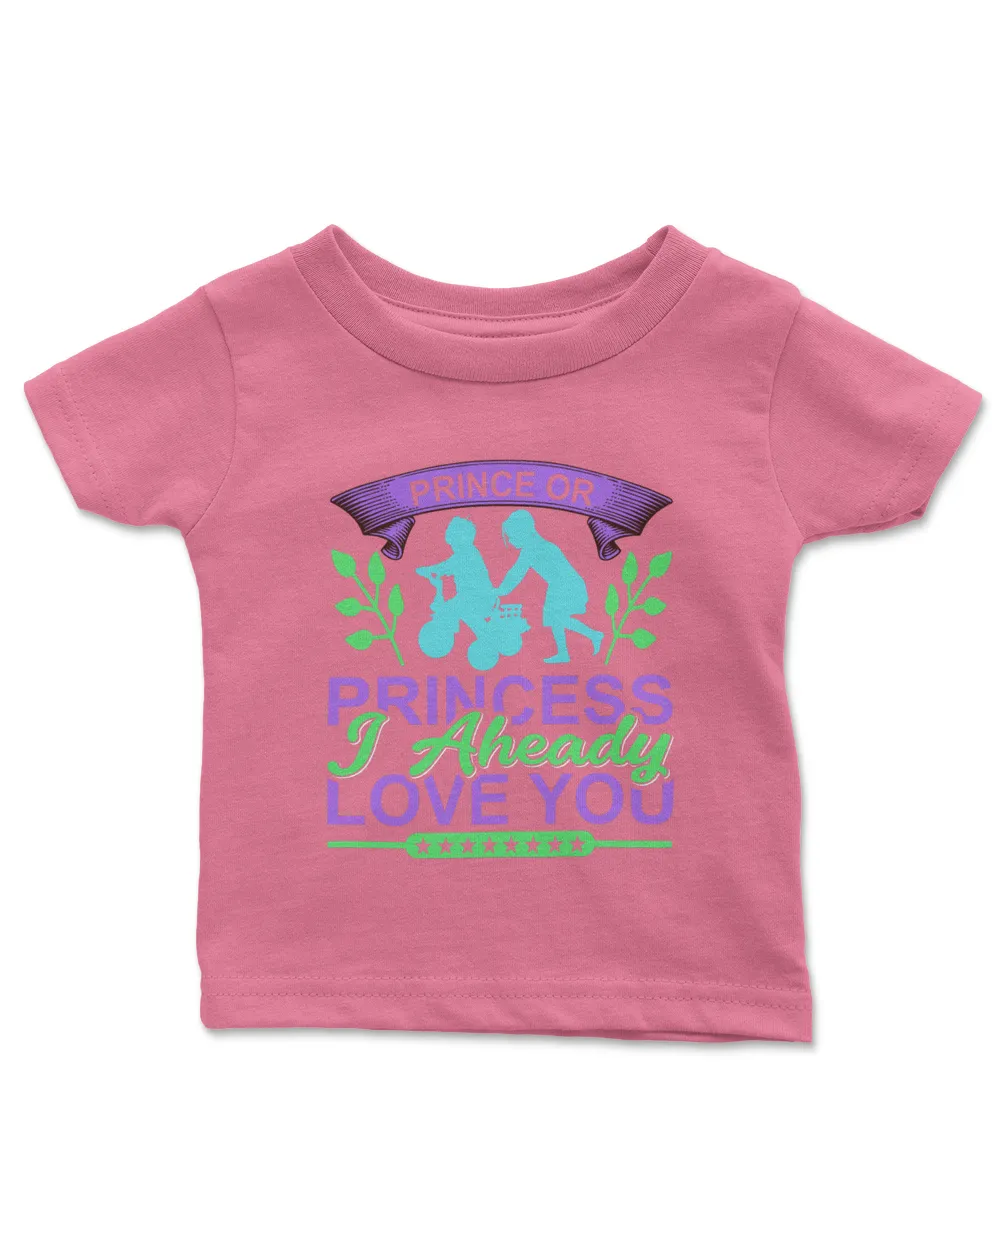 Baby Shirt, Love Baby T-Shirt, Infant baby suit (11)